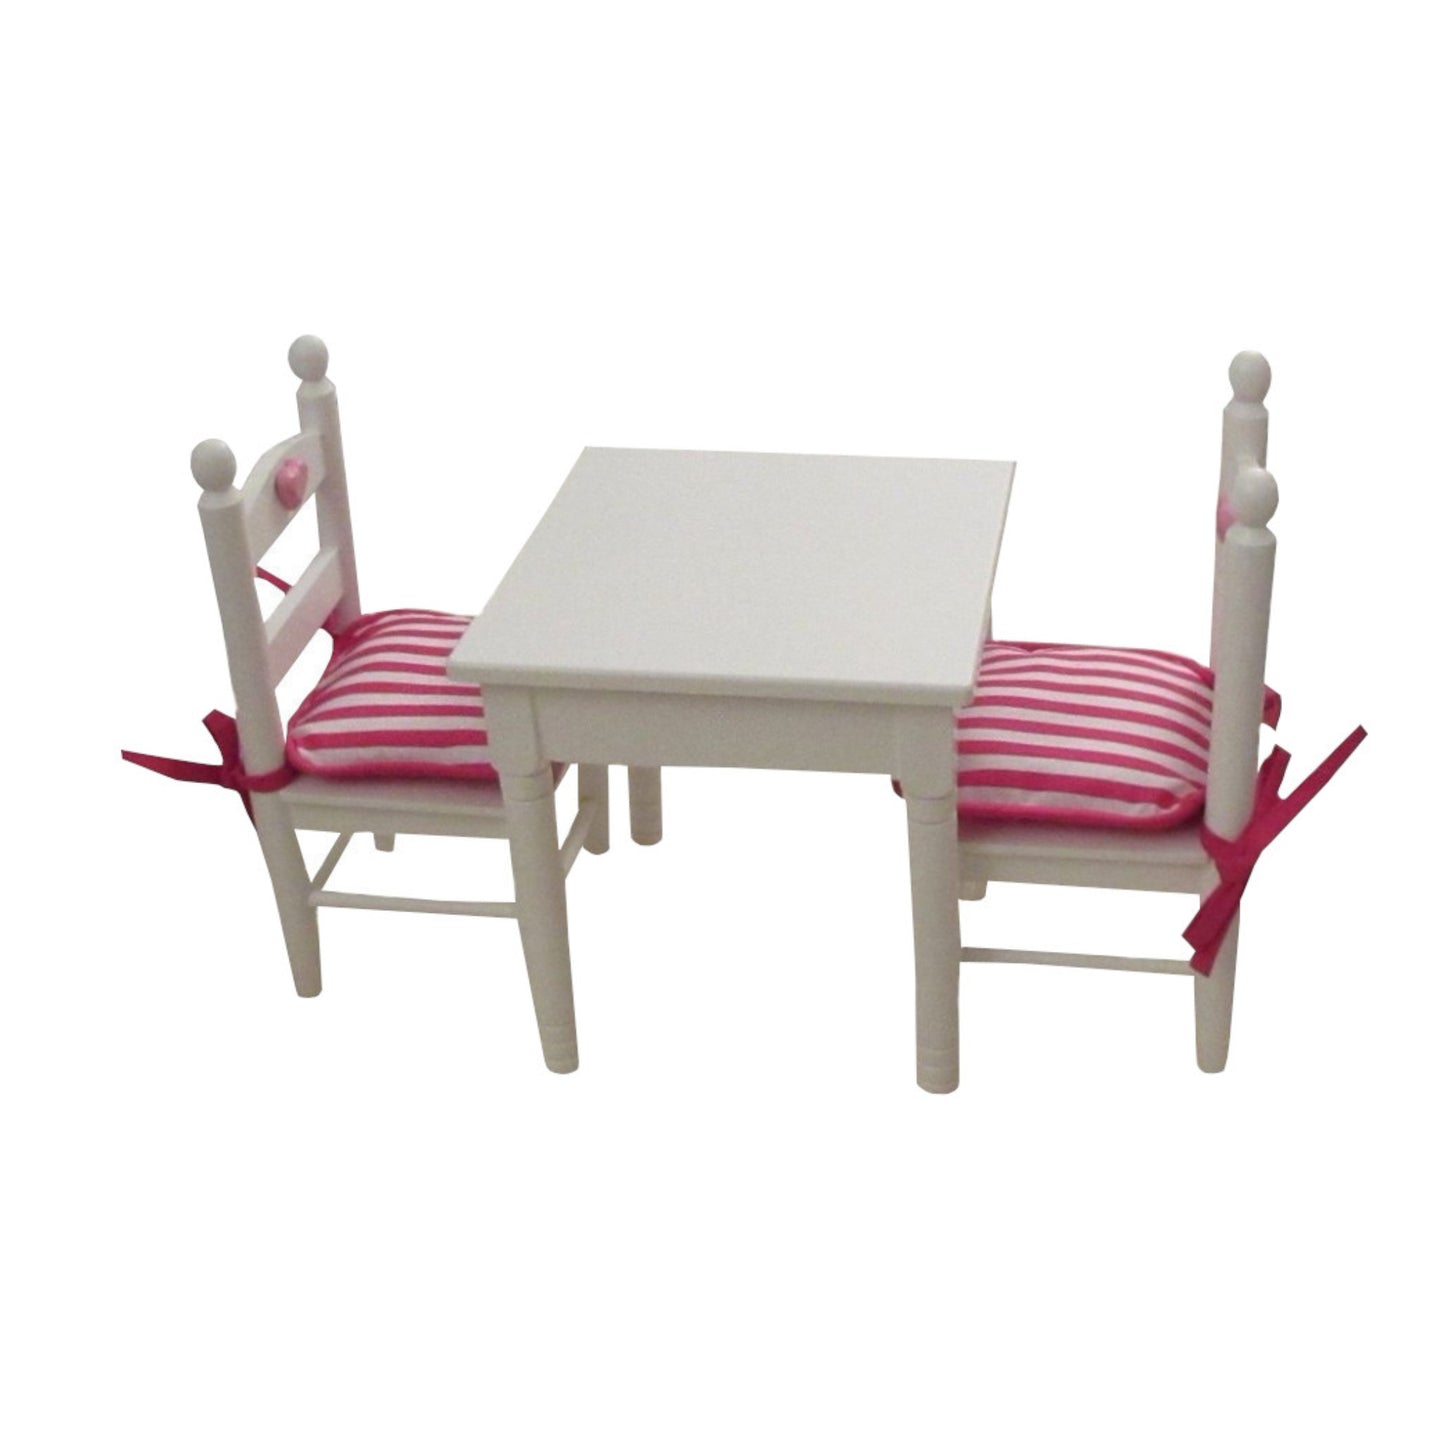 Pink and White Stripes Doll Chair Cushions for 18-inch dolls